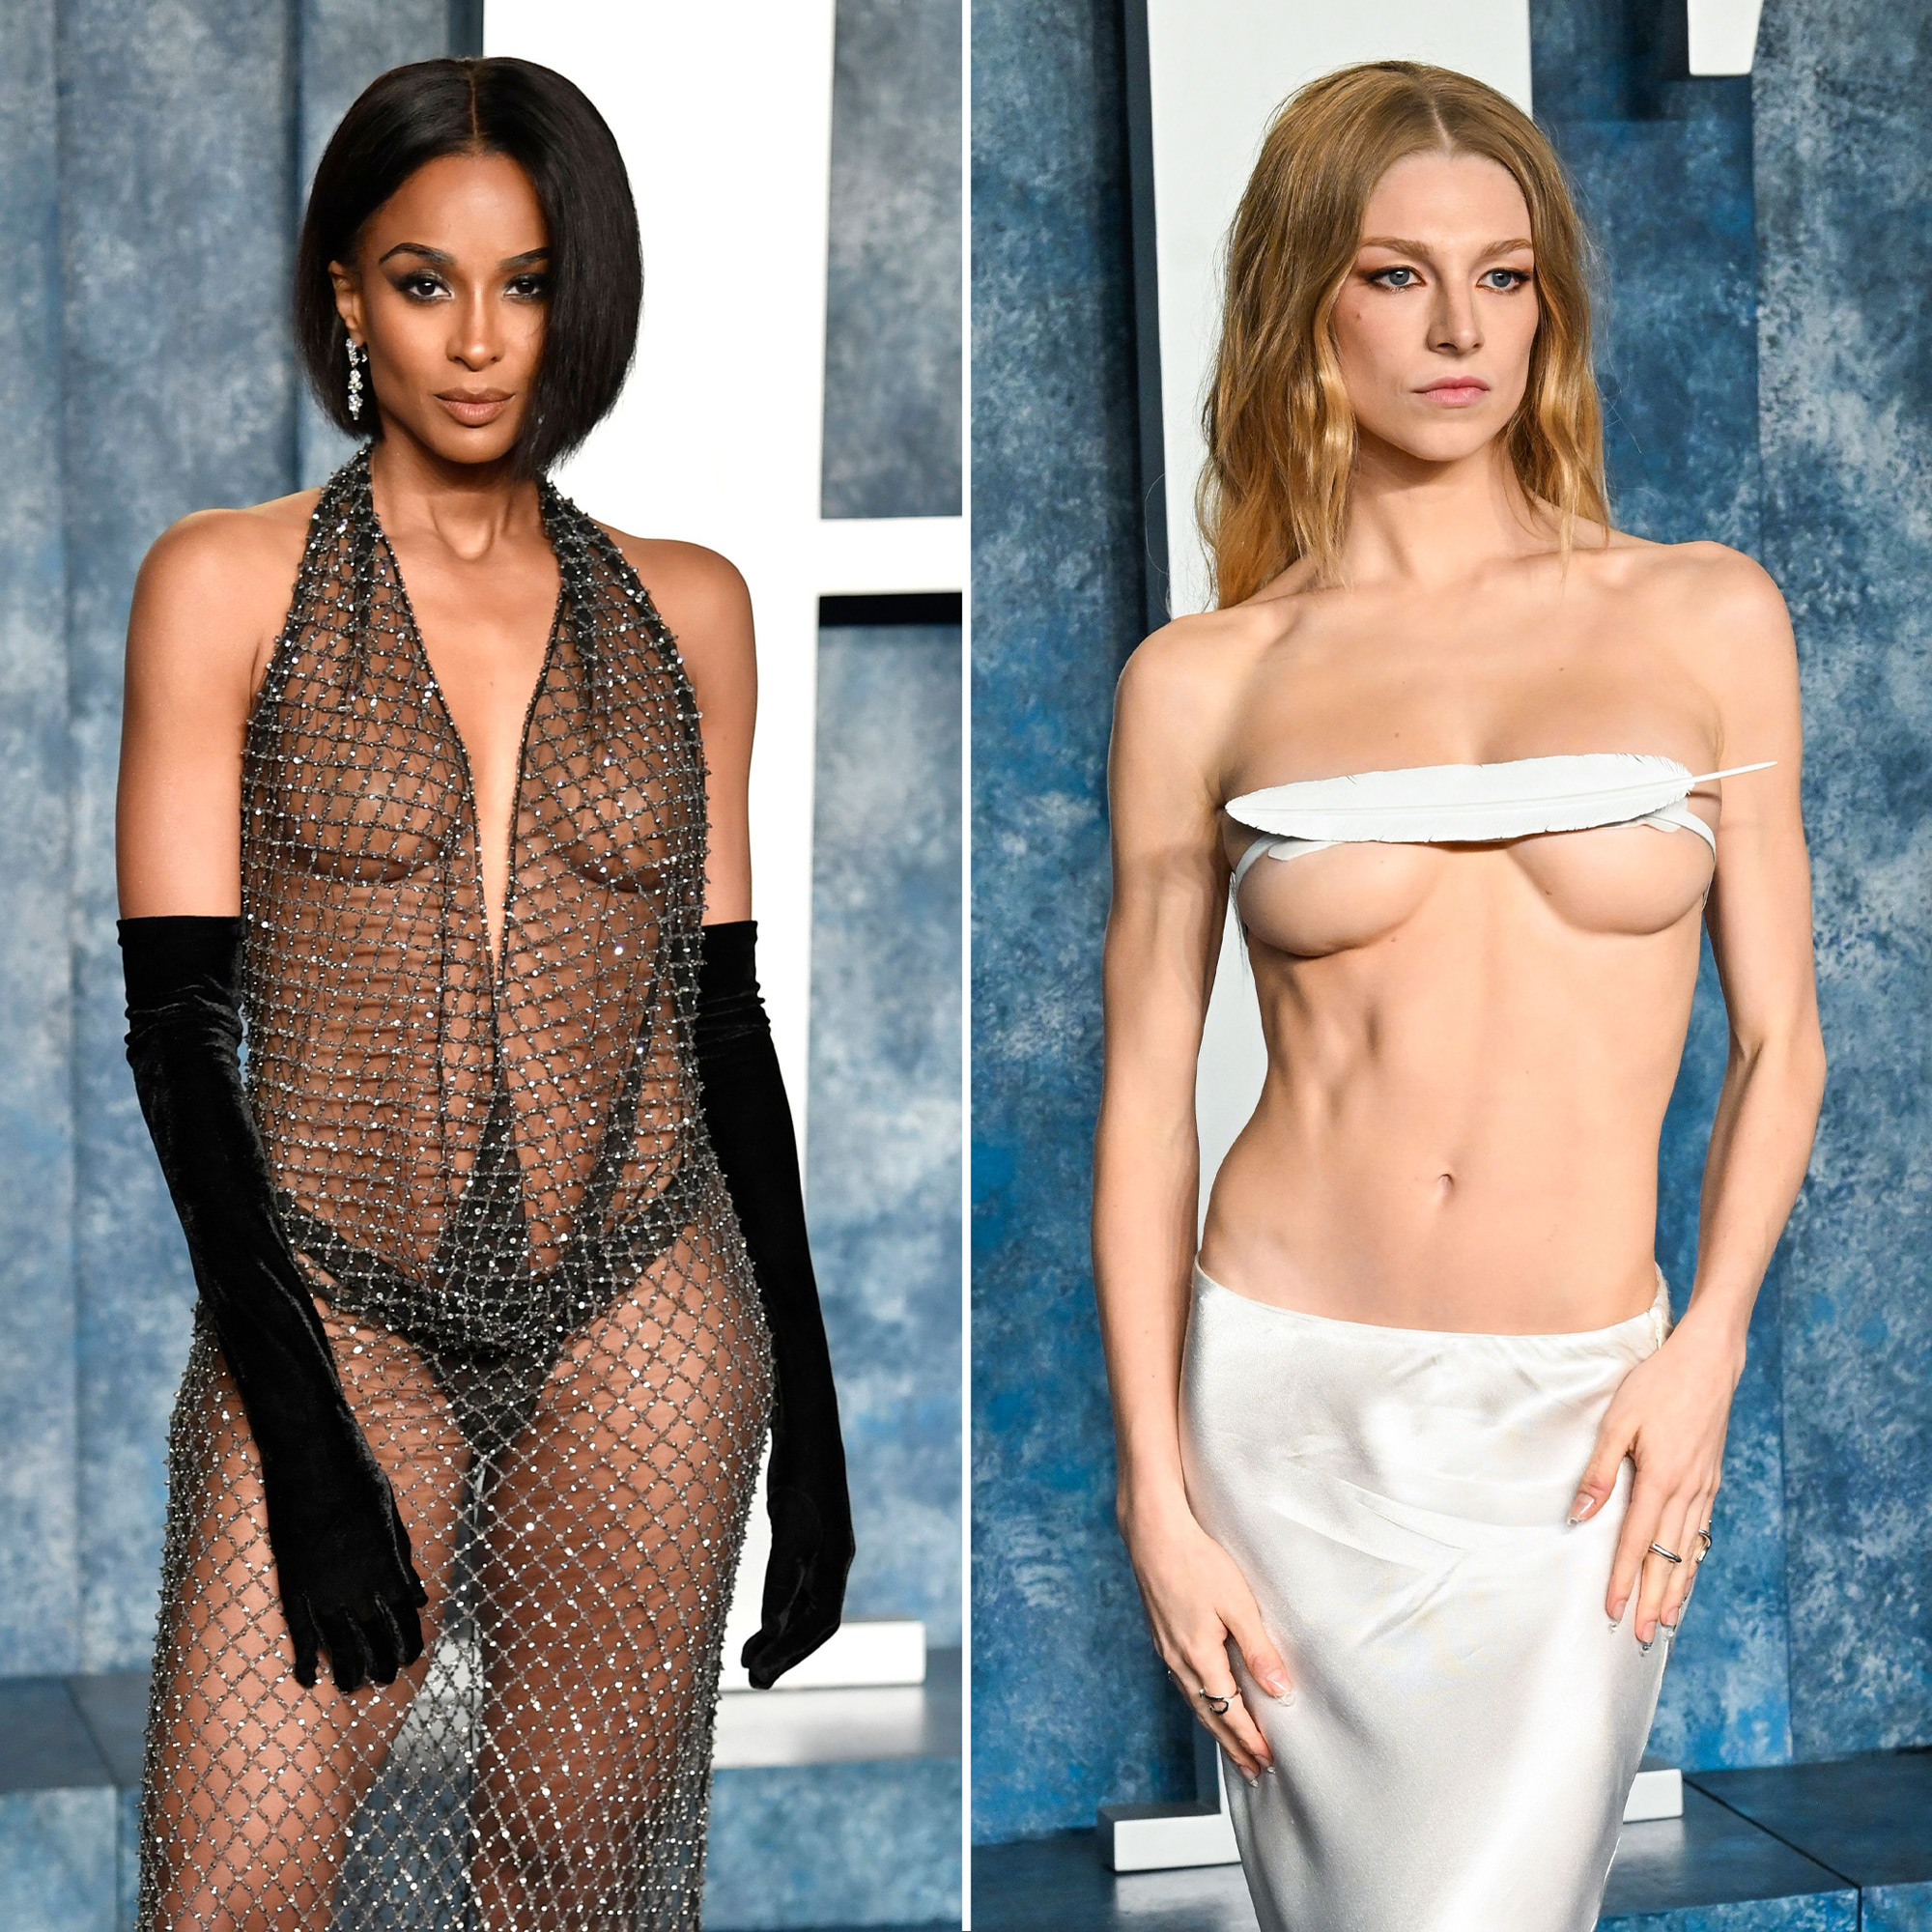 Vintage Asian Celebrity Nudes - Celebs Boldest Nearly Naked Red Carpet Looks of All Time